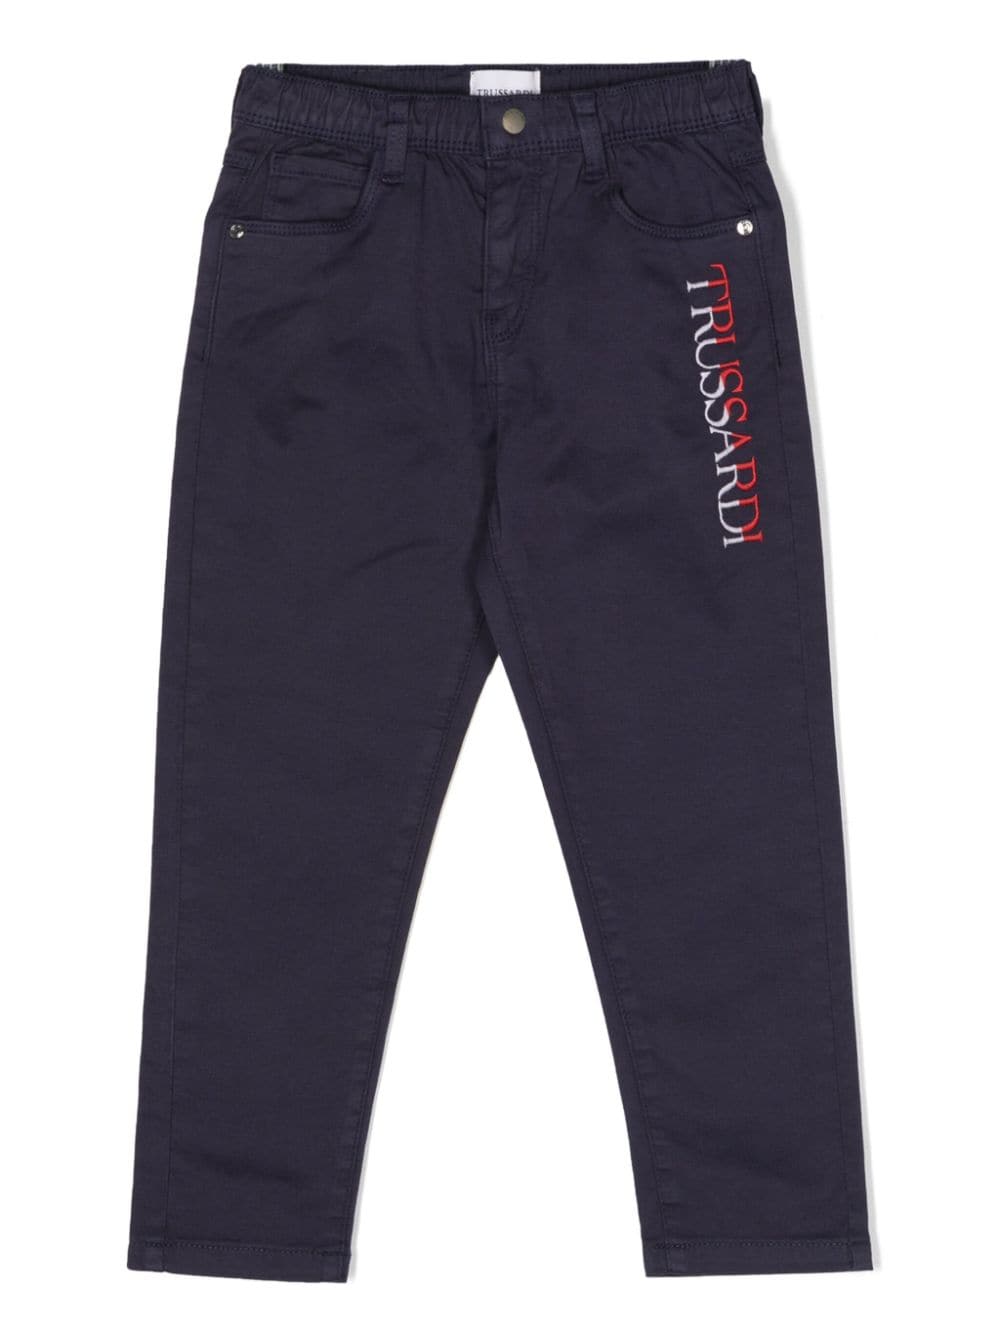 Blue trousers for boys with logo